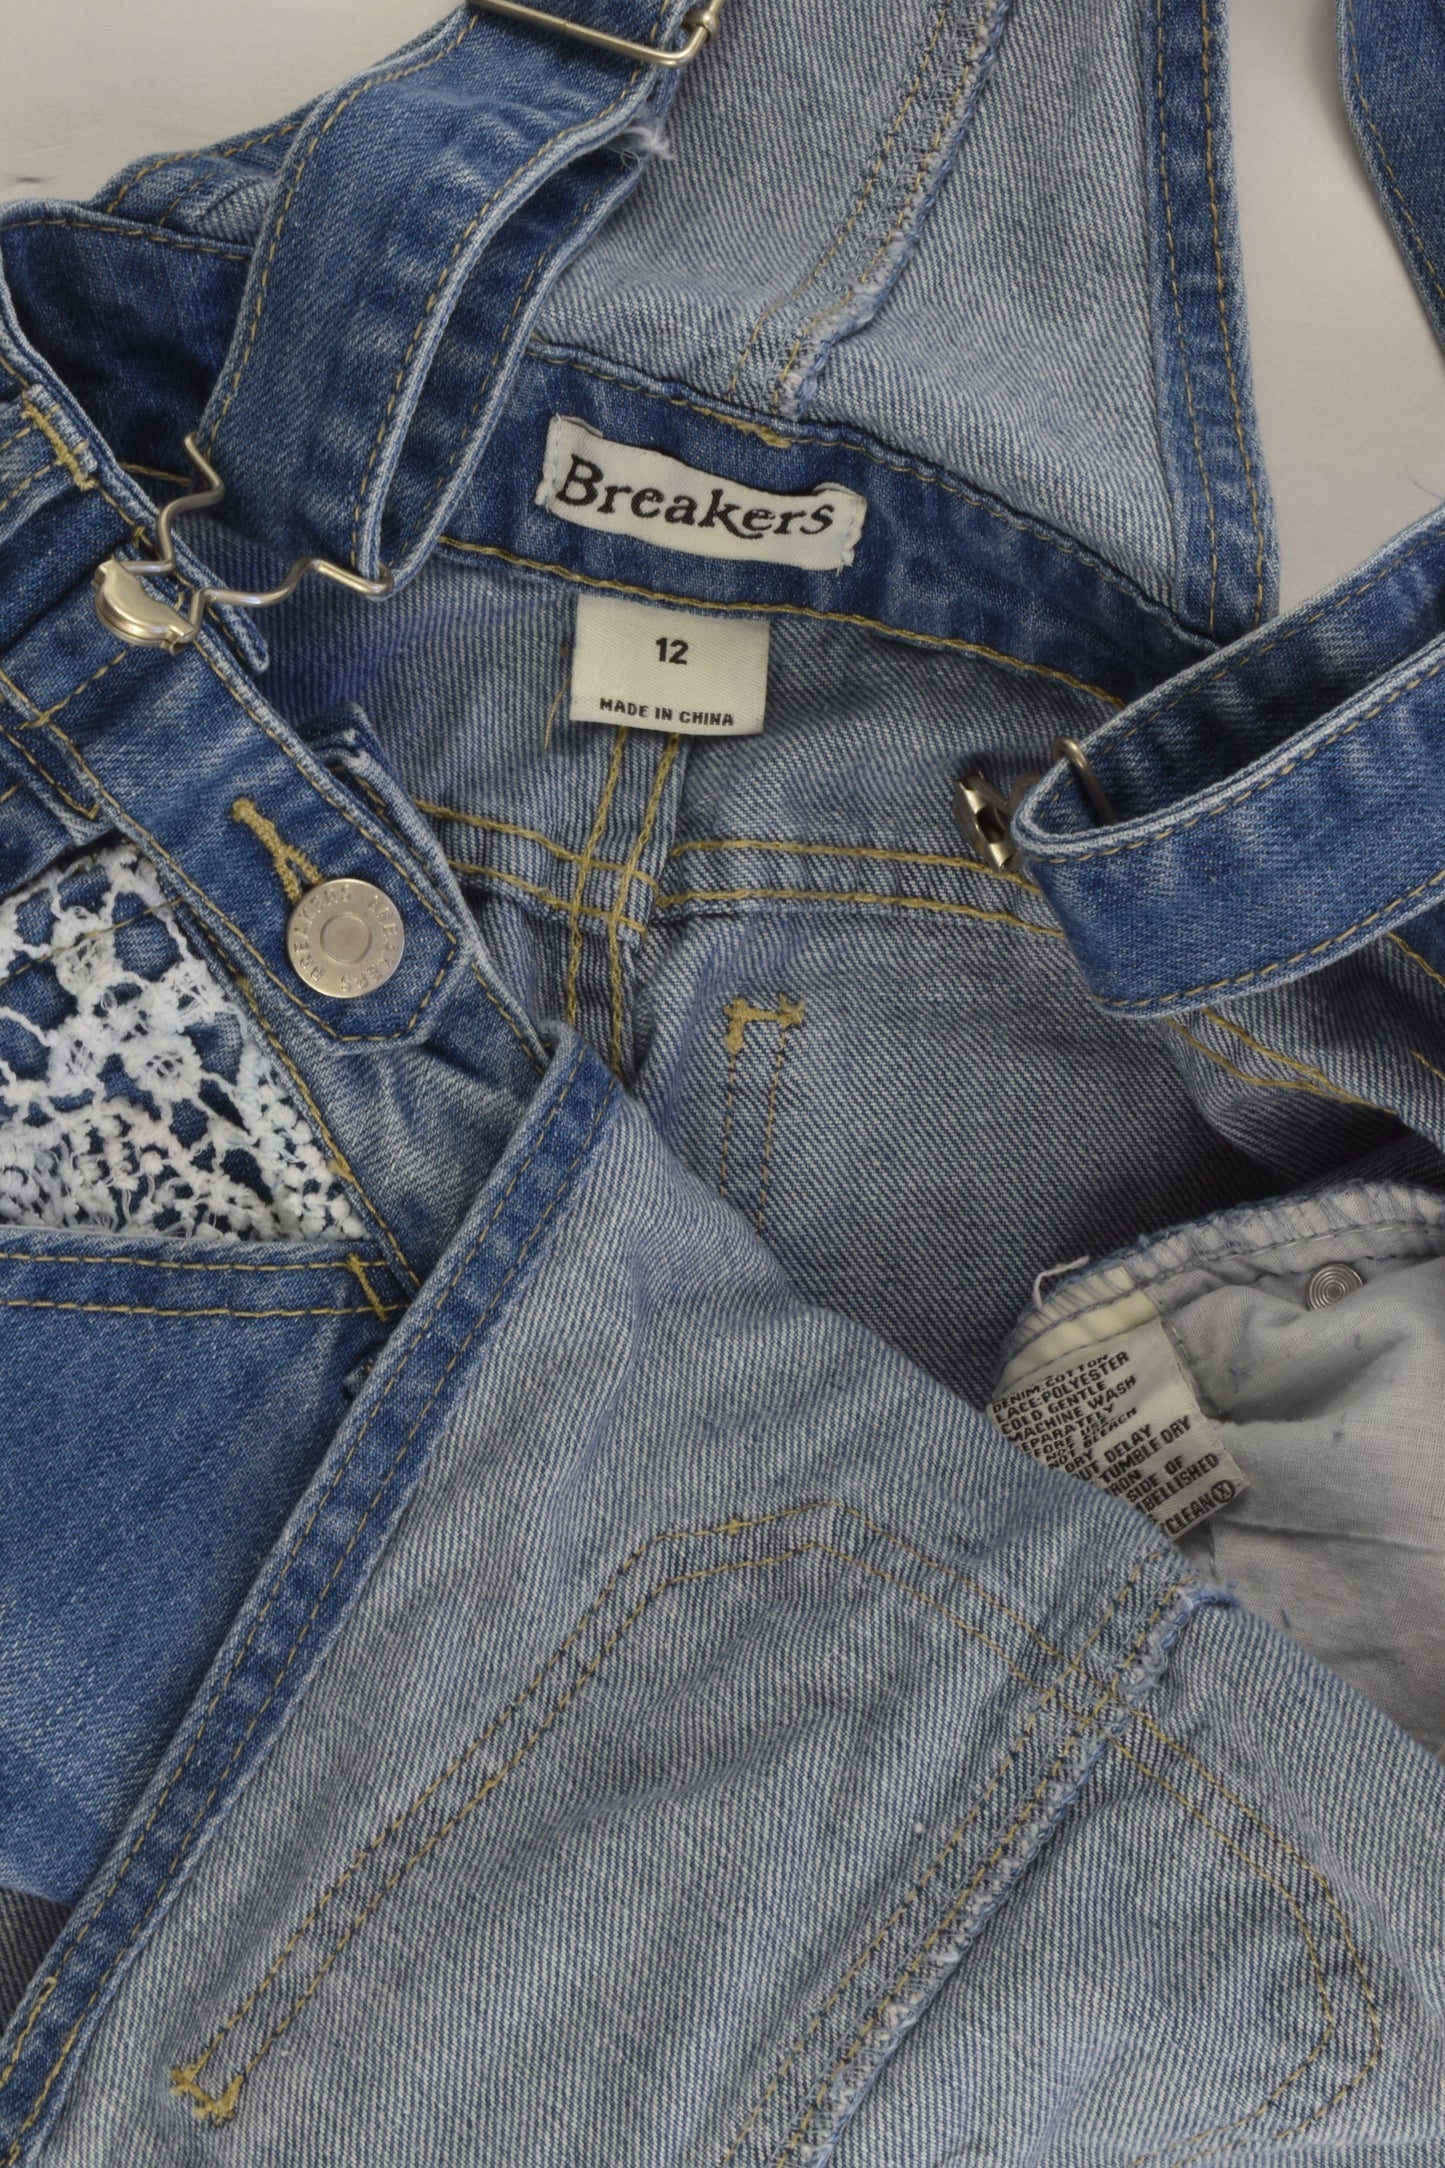 Breakers Size 12 Short Denim Overalls with Lace Details